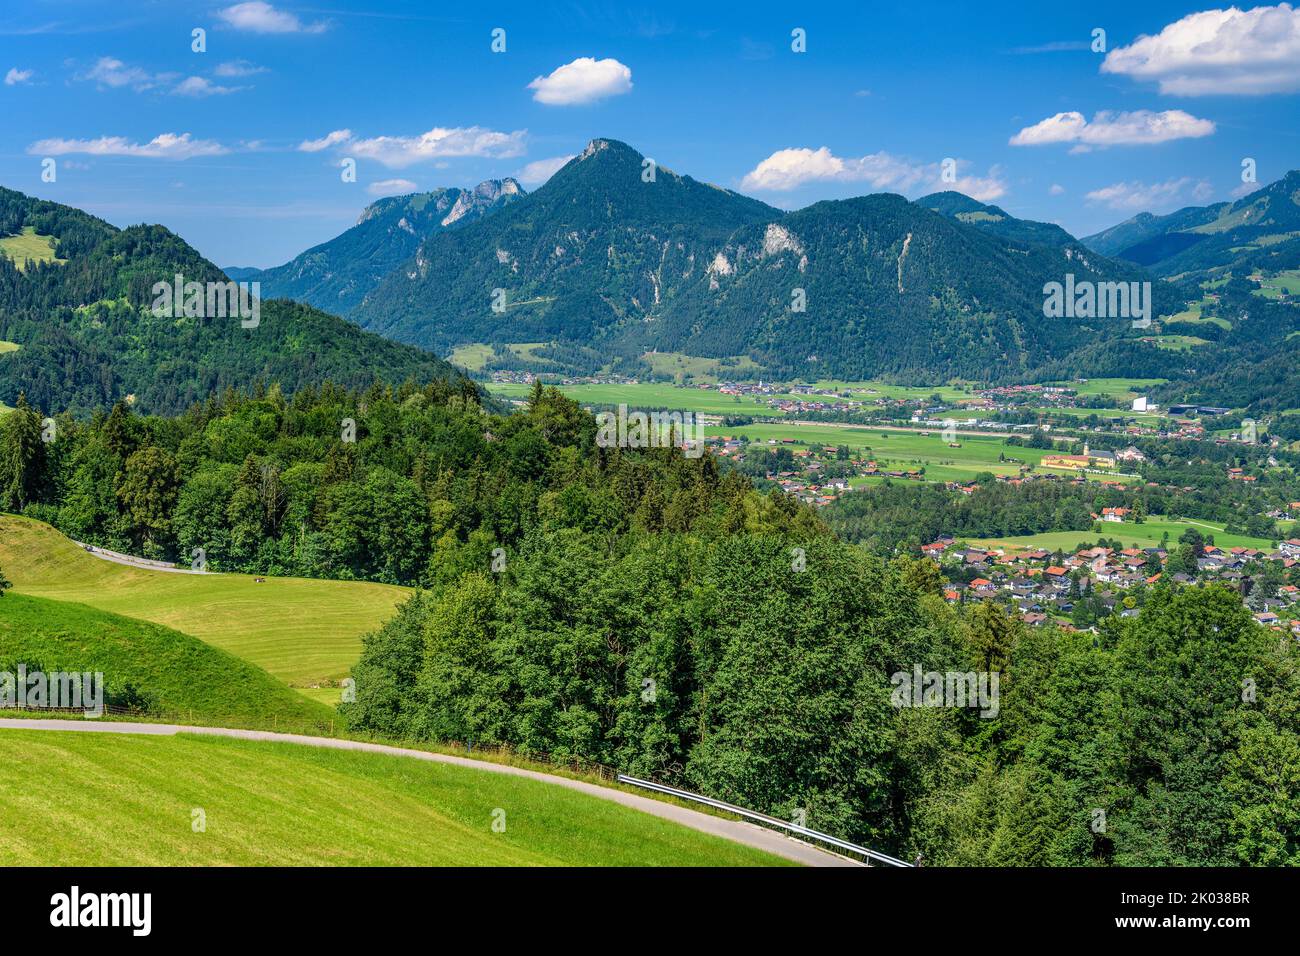 Germany, Bavaria, county Rosenheim, Oberaudorf, view from Hocheck chair lift over Inn valley against Chiemgau Alps Stock Photo